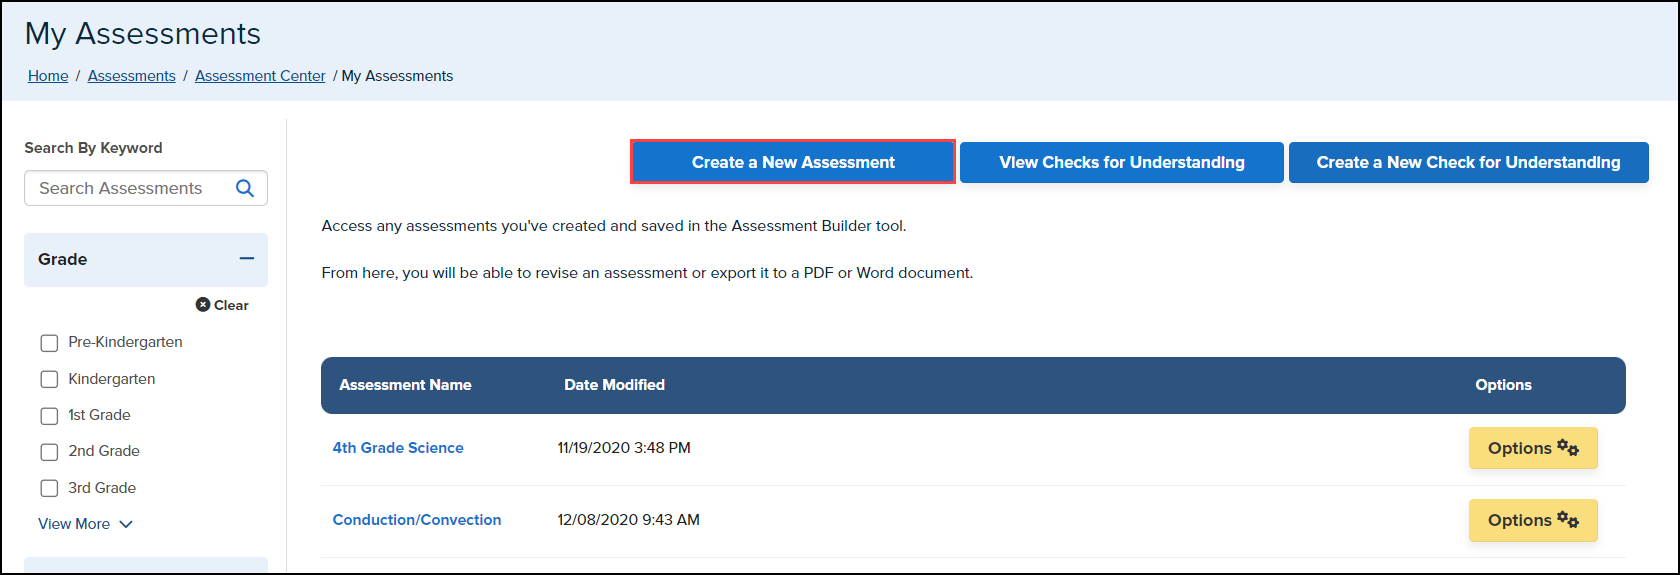 my assessments page with create a new assessment button highlighted